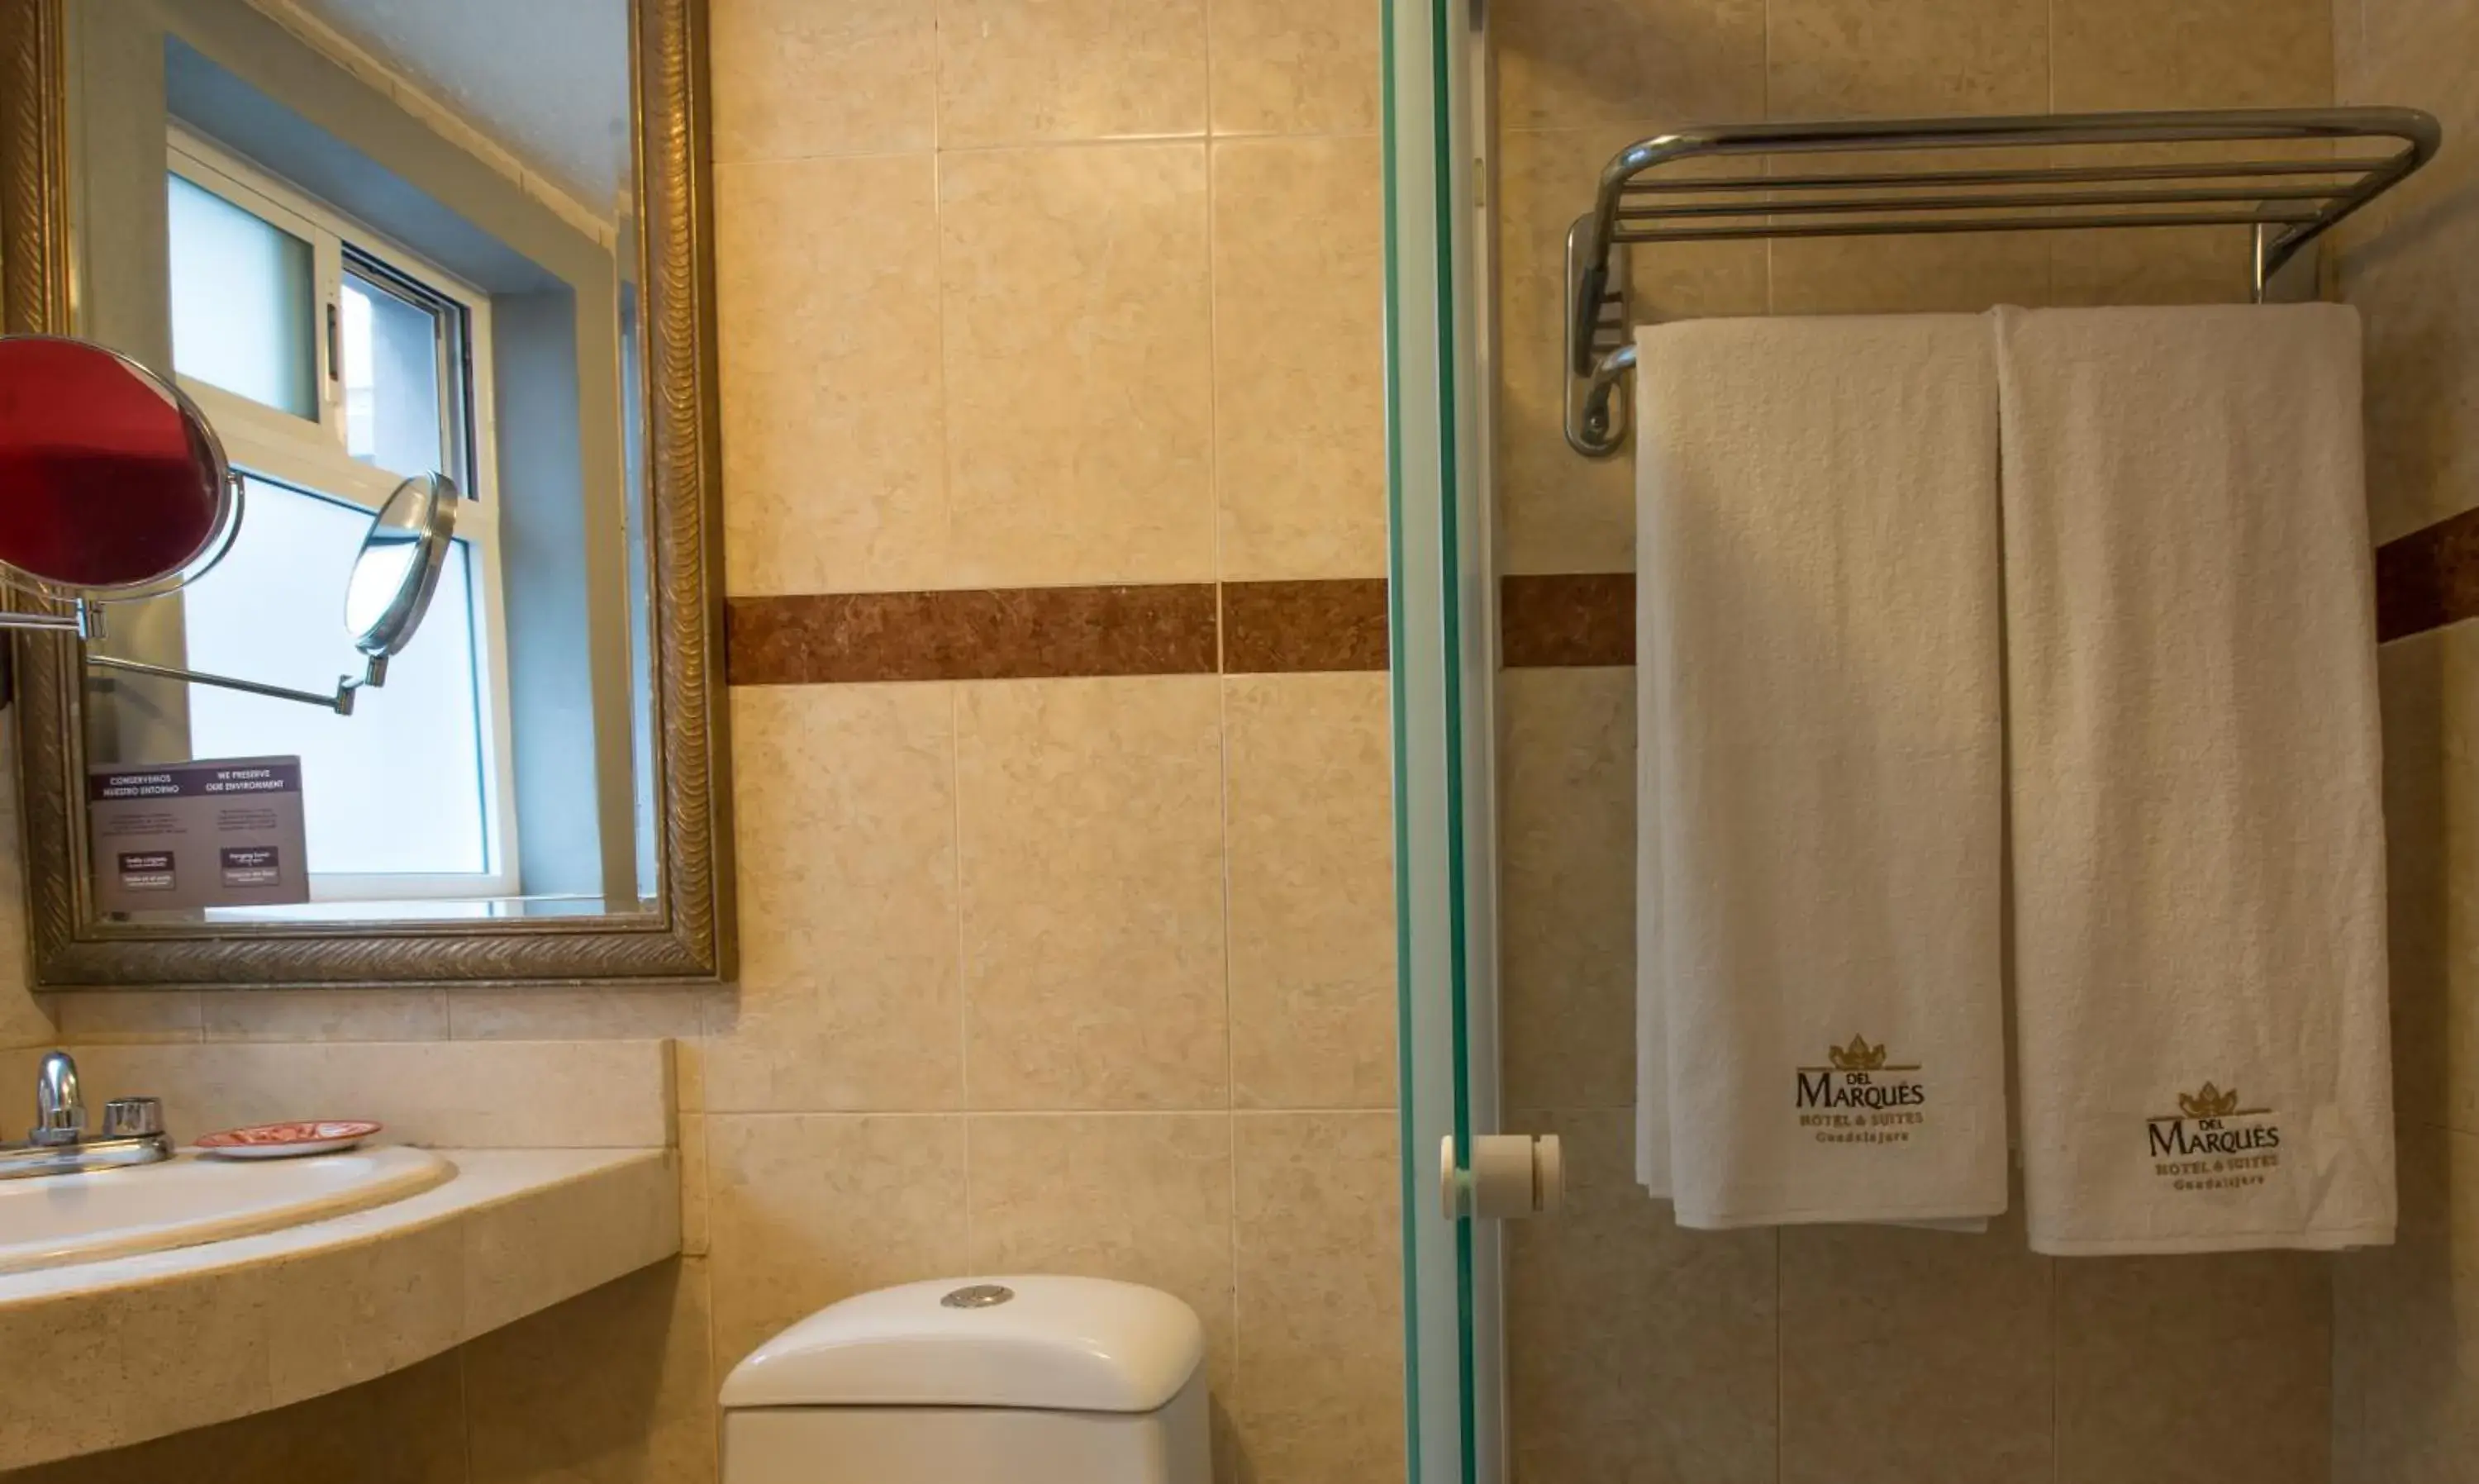 Bathroom in Del Marques Hotel and Suites